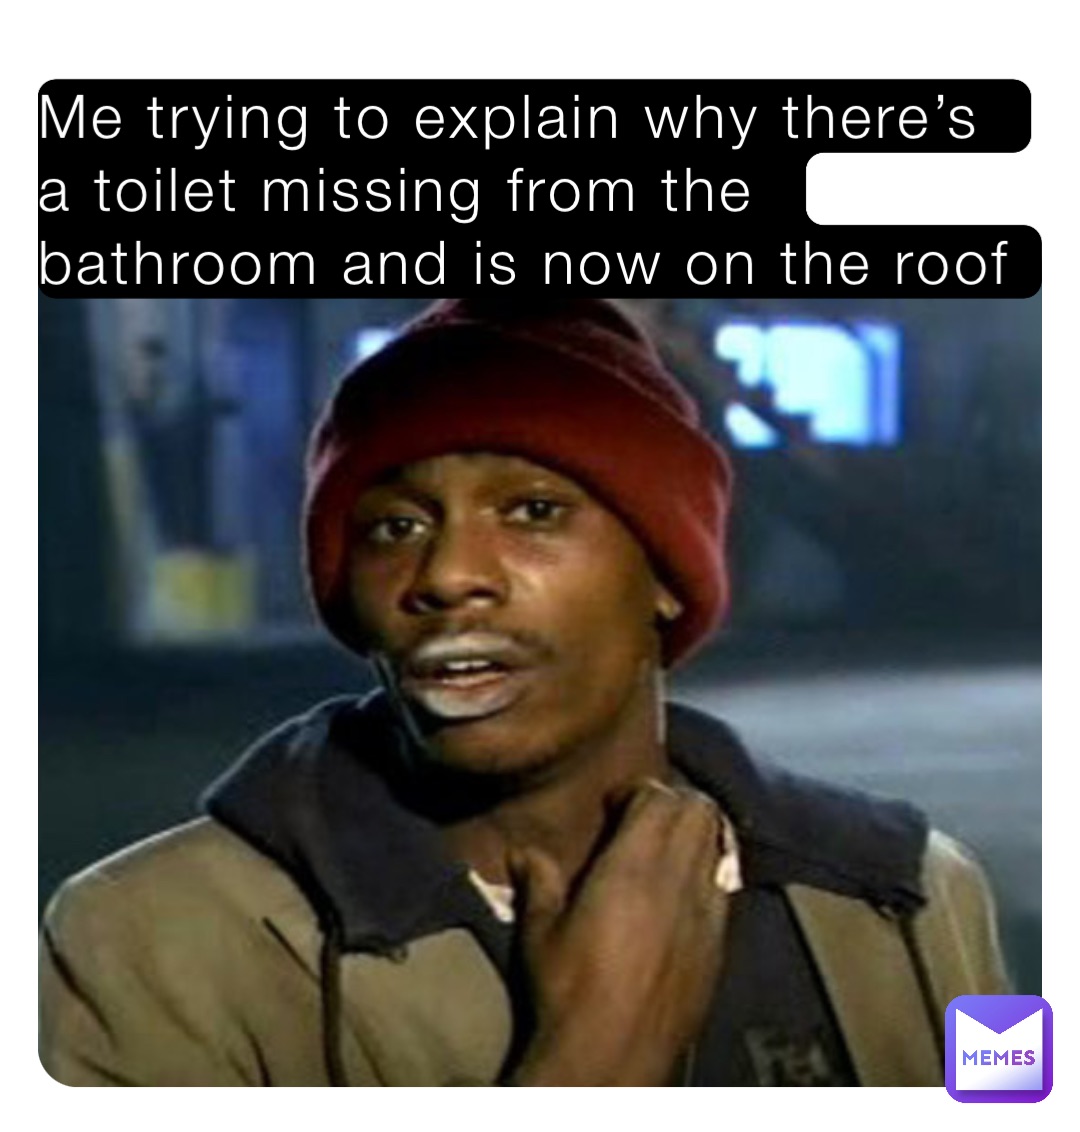 Me trying to explain why there’s a toilet missing from the bathroom and is now on the roof